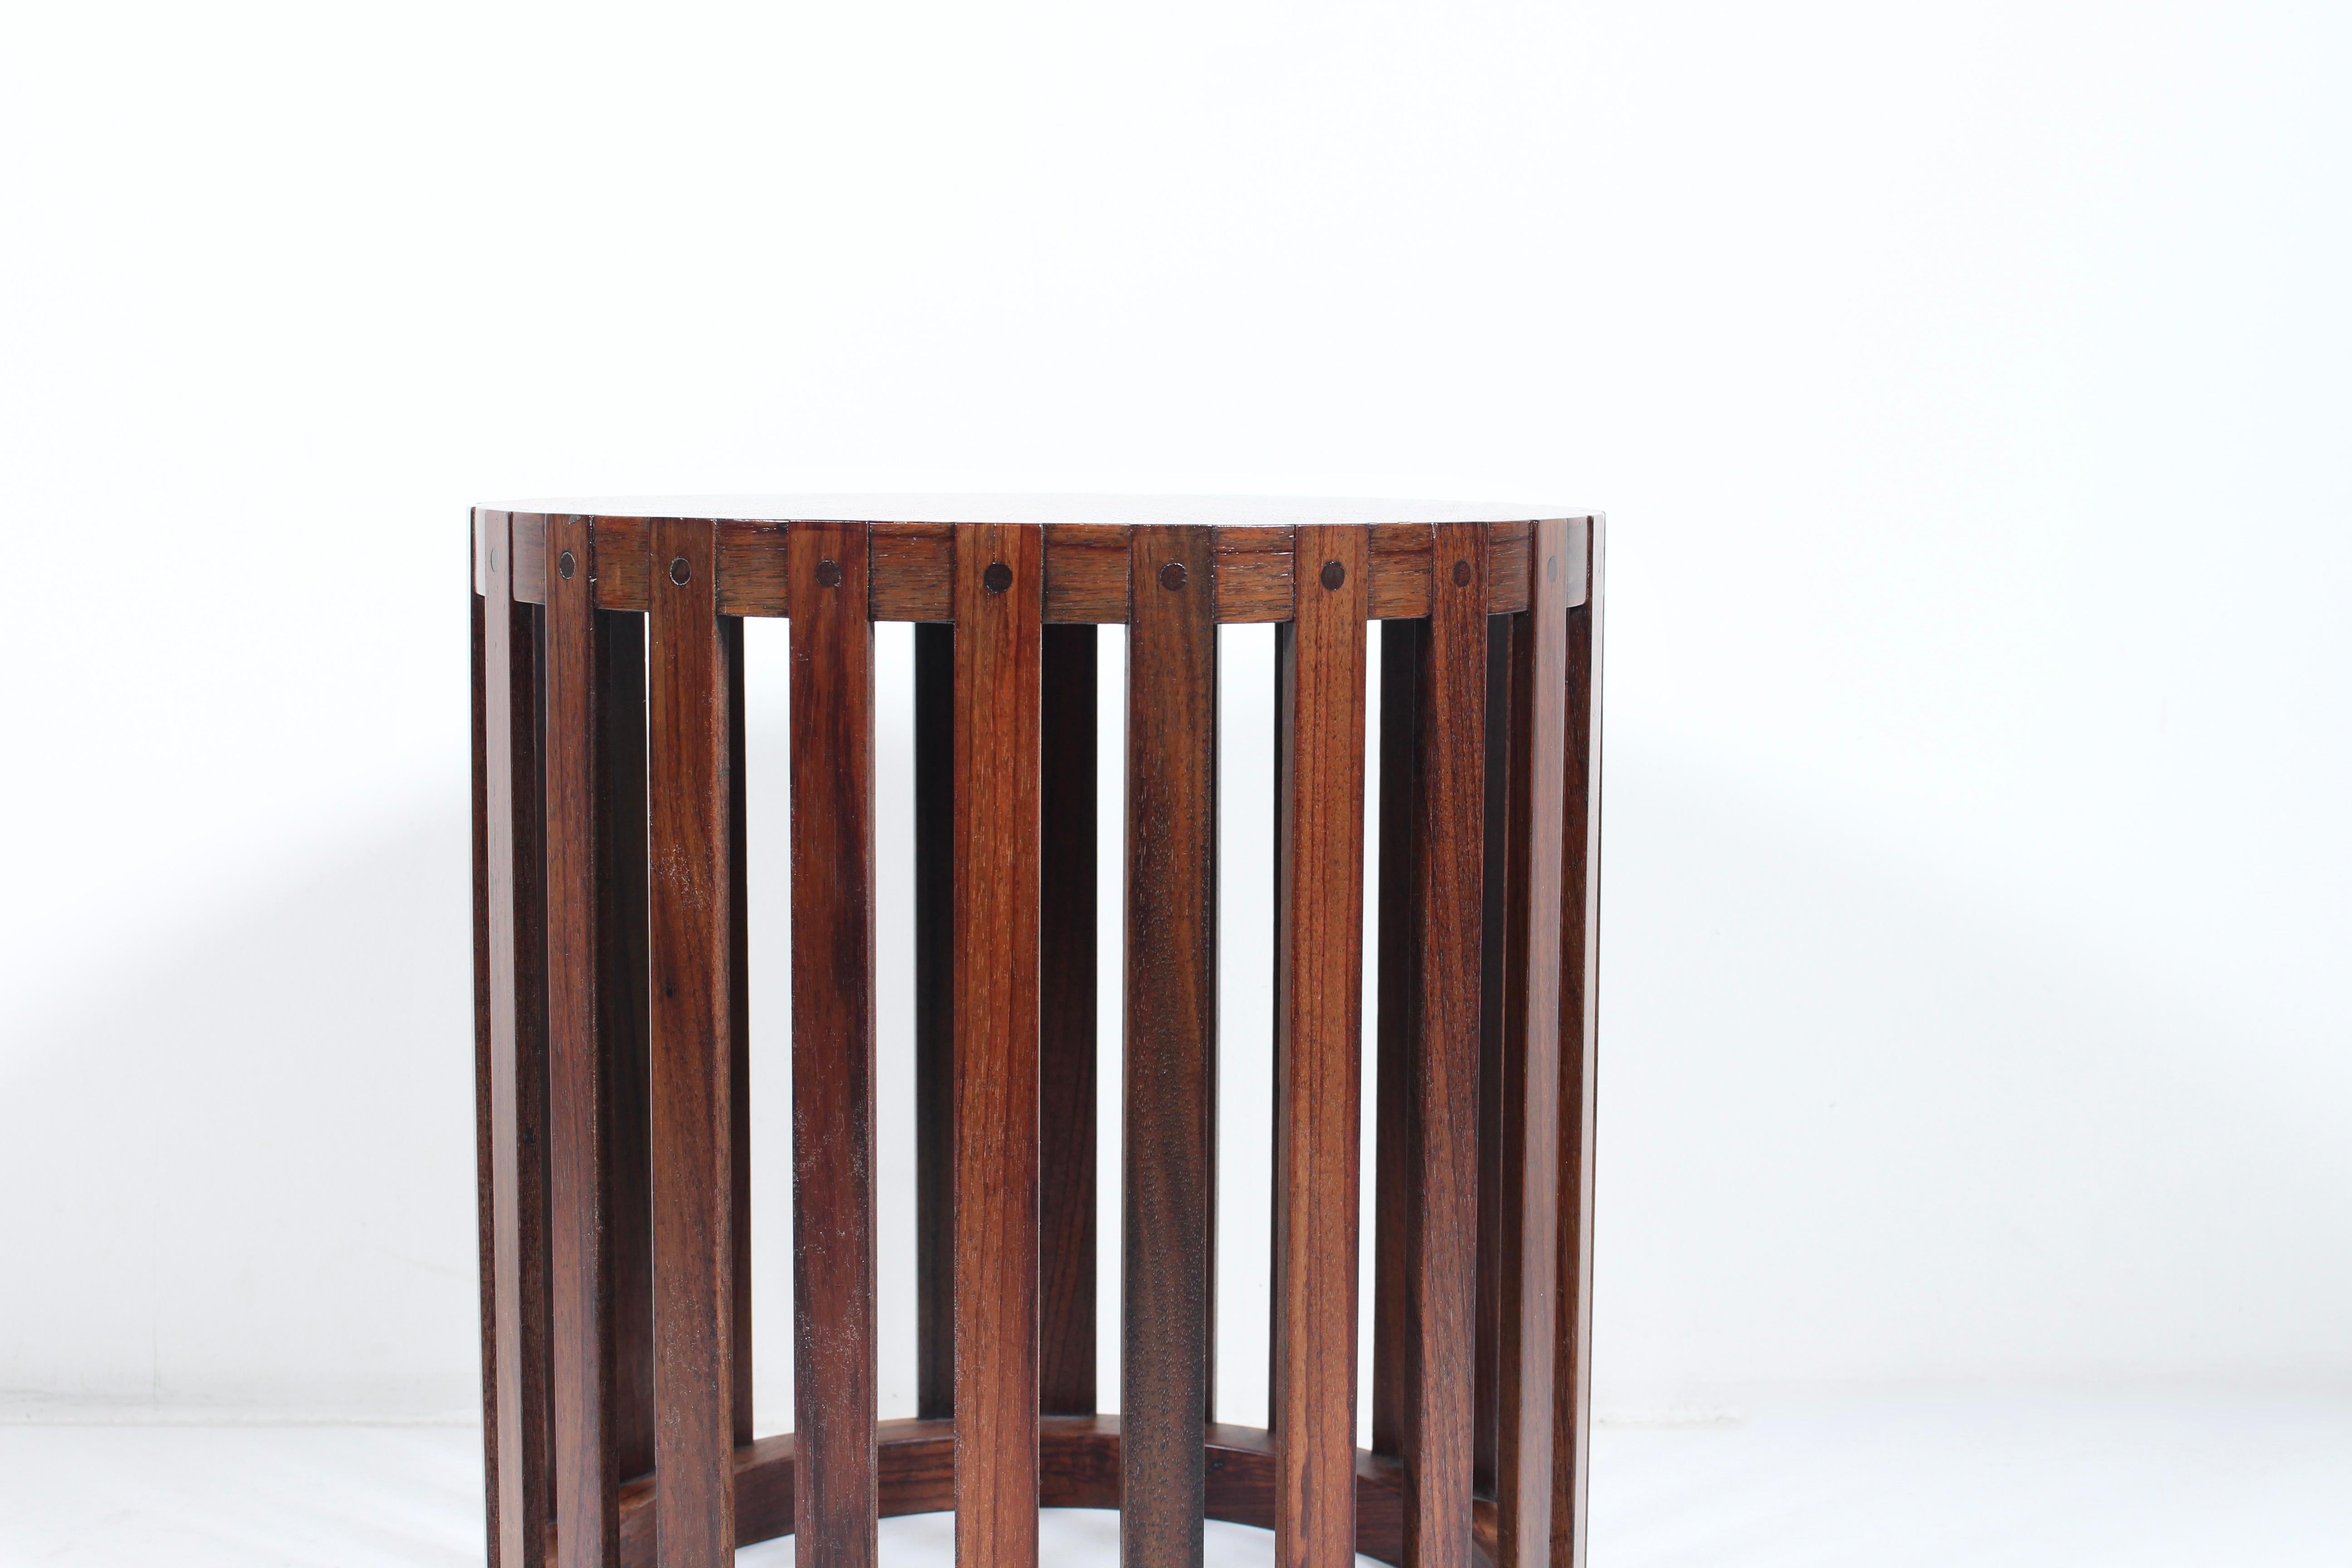 1960's Metropolitan Furniture Corp. round slatted and pegged solid rosewood occasional, side, end table. Featuring a solid Rosewood compact, drum style framework with slatted sides, attached top and bottom rings with wooden pegs. Timeless.